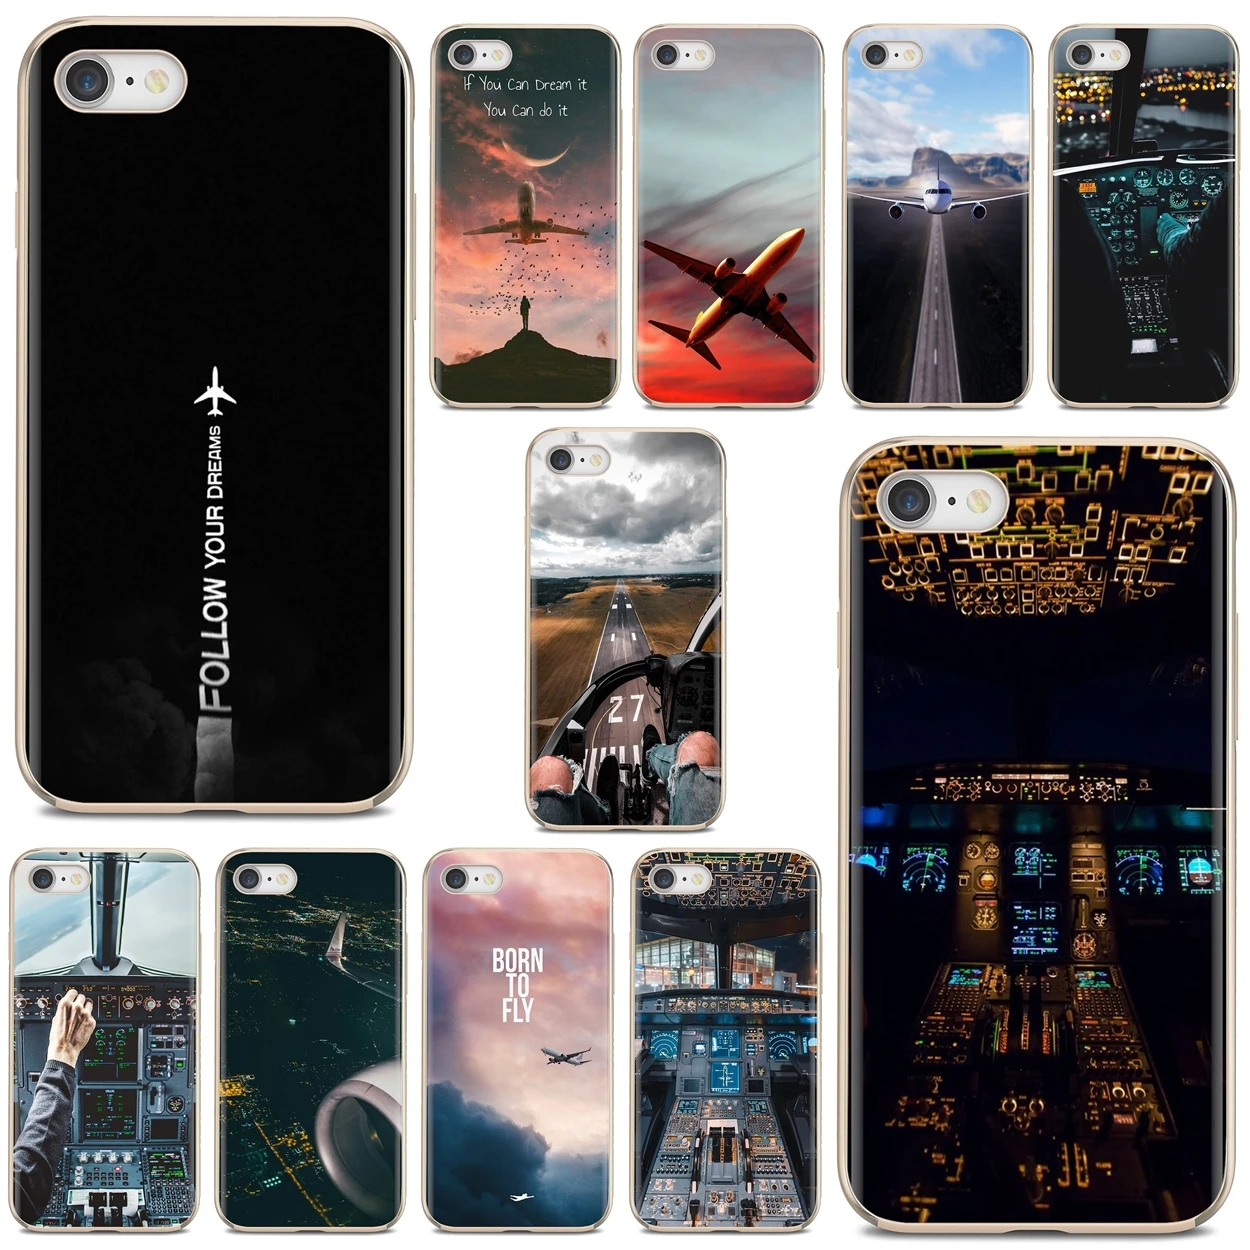 

Bore to fly Pilot Plane travel For iPhone 10 11 12 13 Mini Pro 4S 5S SE 5C 6 6S 7 8 X XR XS Plus Max 2020 Silicone Bag Case